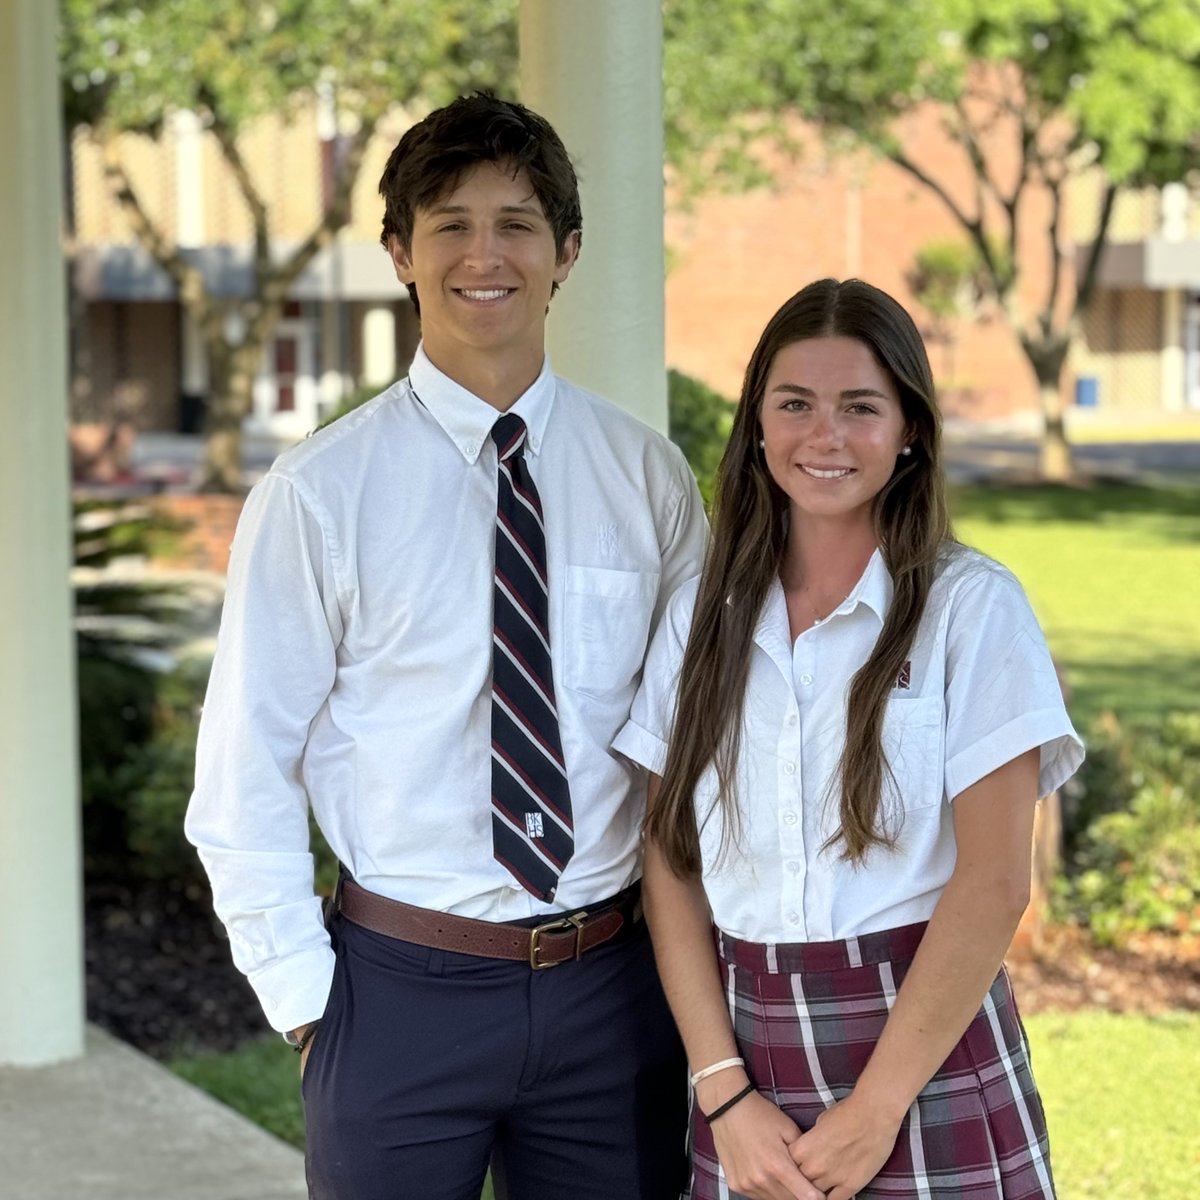 Congratulations to our May Students of the Month, Mallory Swain and Andrew Patelli! We honor Mallory and Andrew as Best All Around for their remarkable perseverance and motivation both inside and outside the classroom. Way to go, Crusaders!